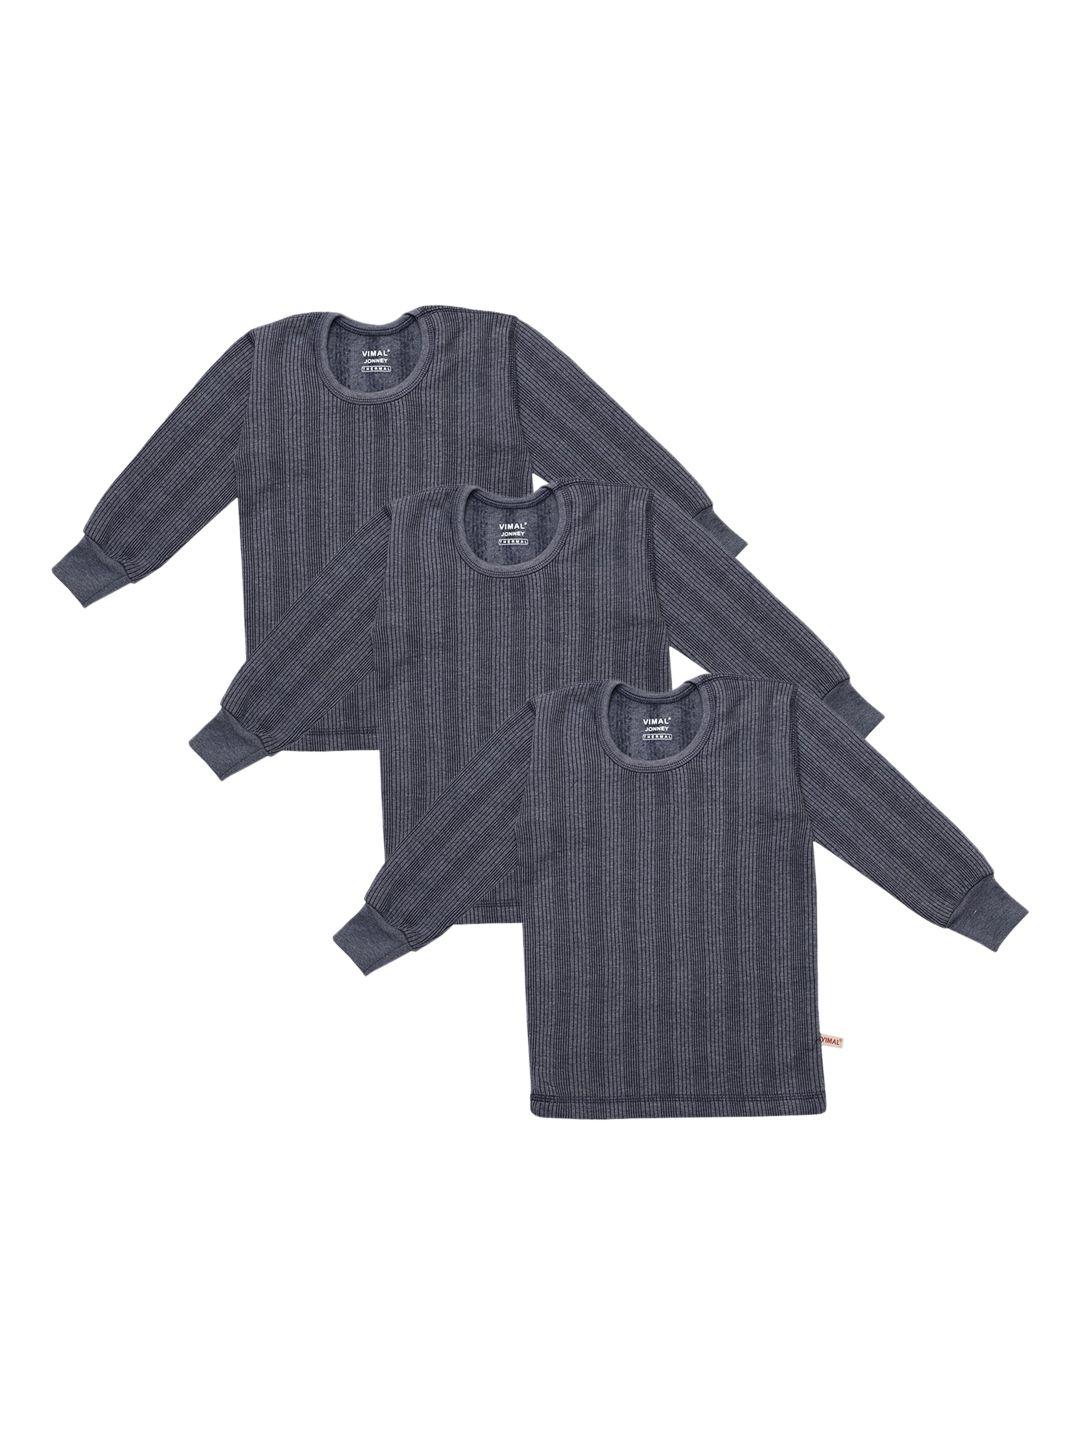 vimal-jonney-infant-kids-pack-of-3-striped-cotton-thermal-tops